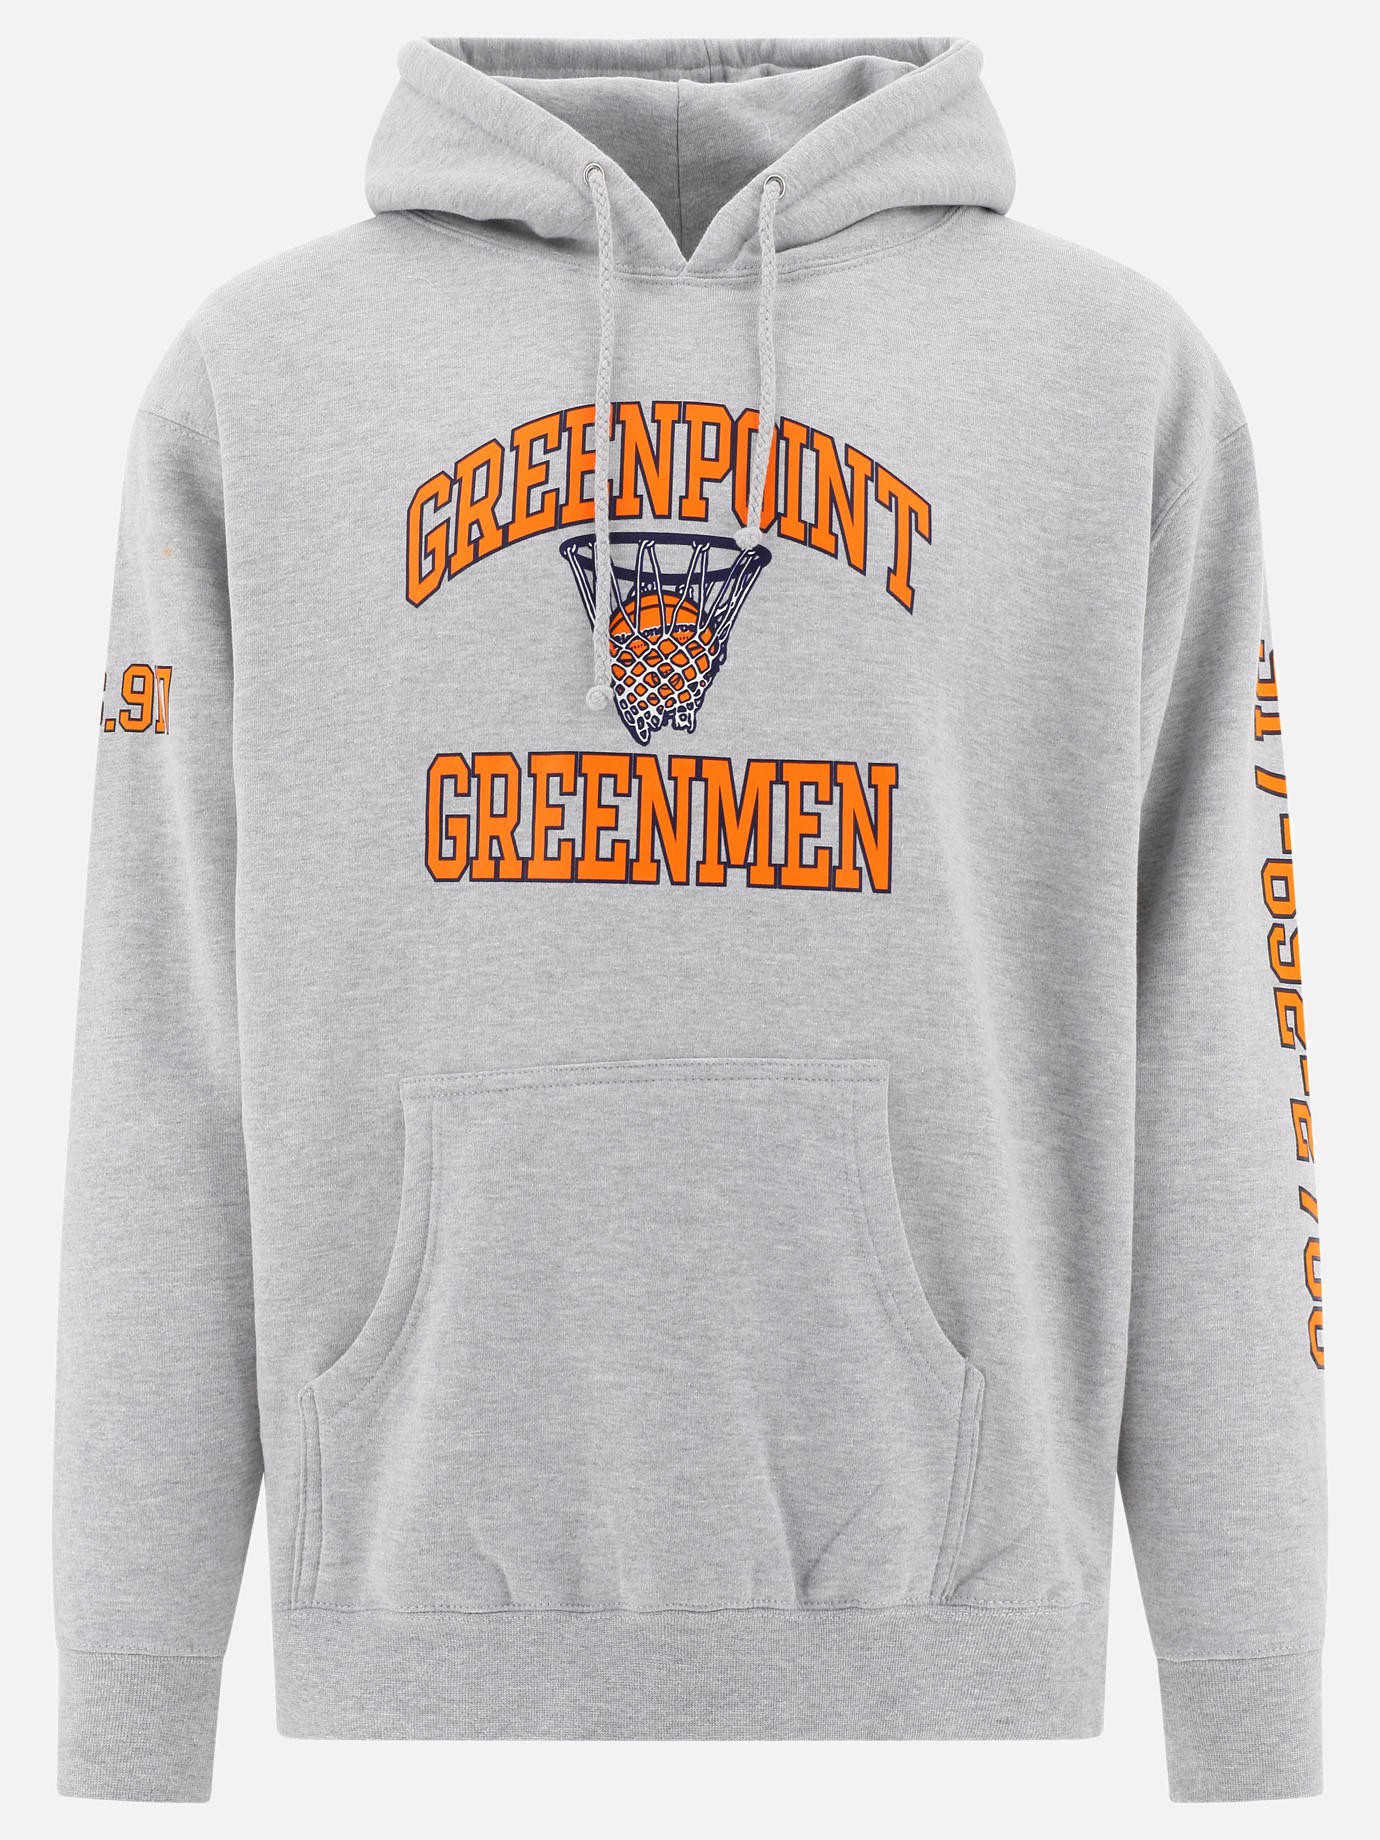  Greenpoint  hoodie by Call Me 917